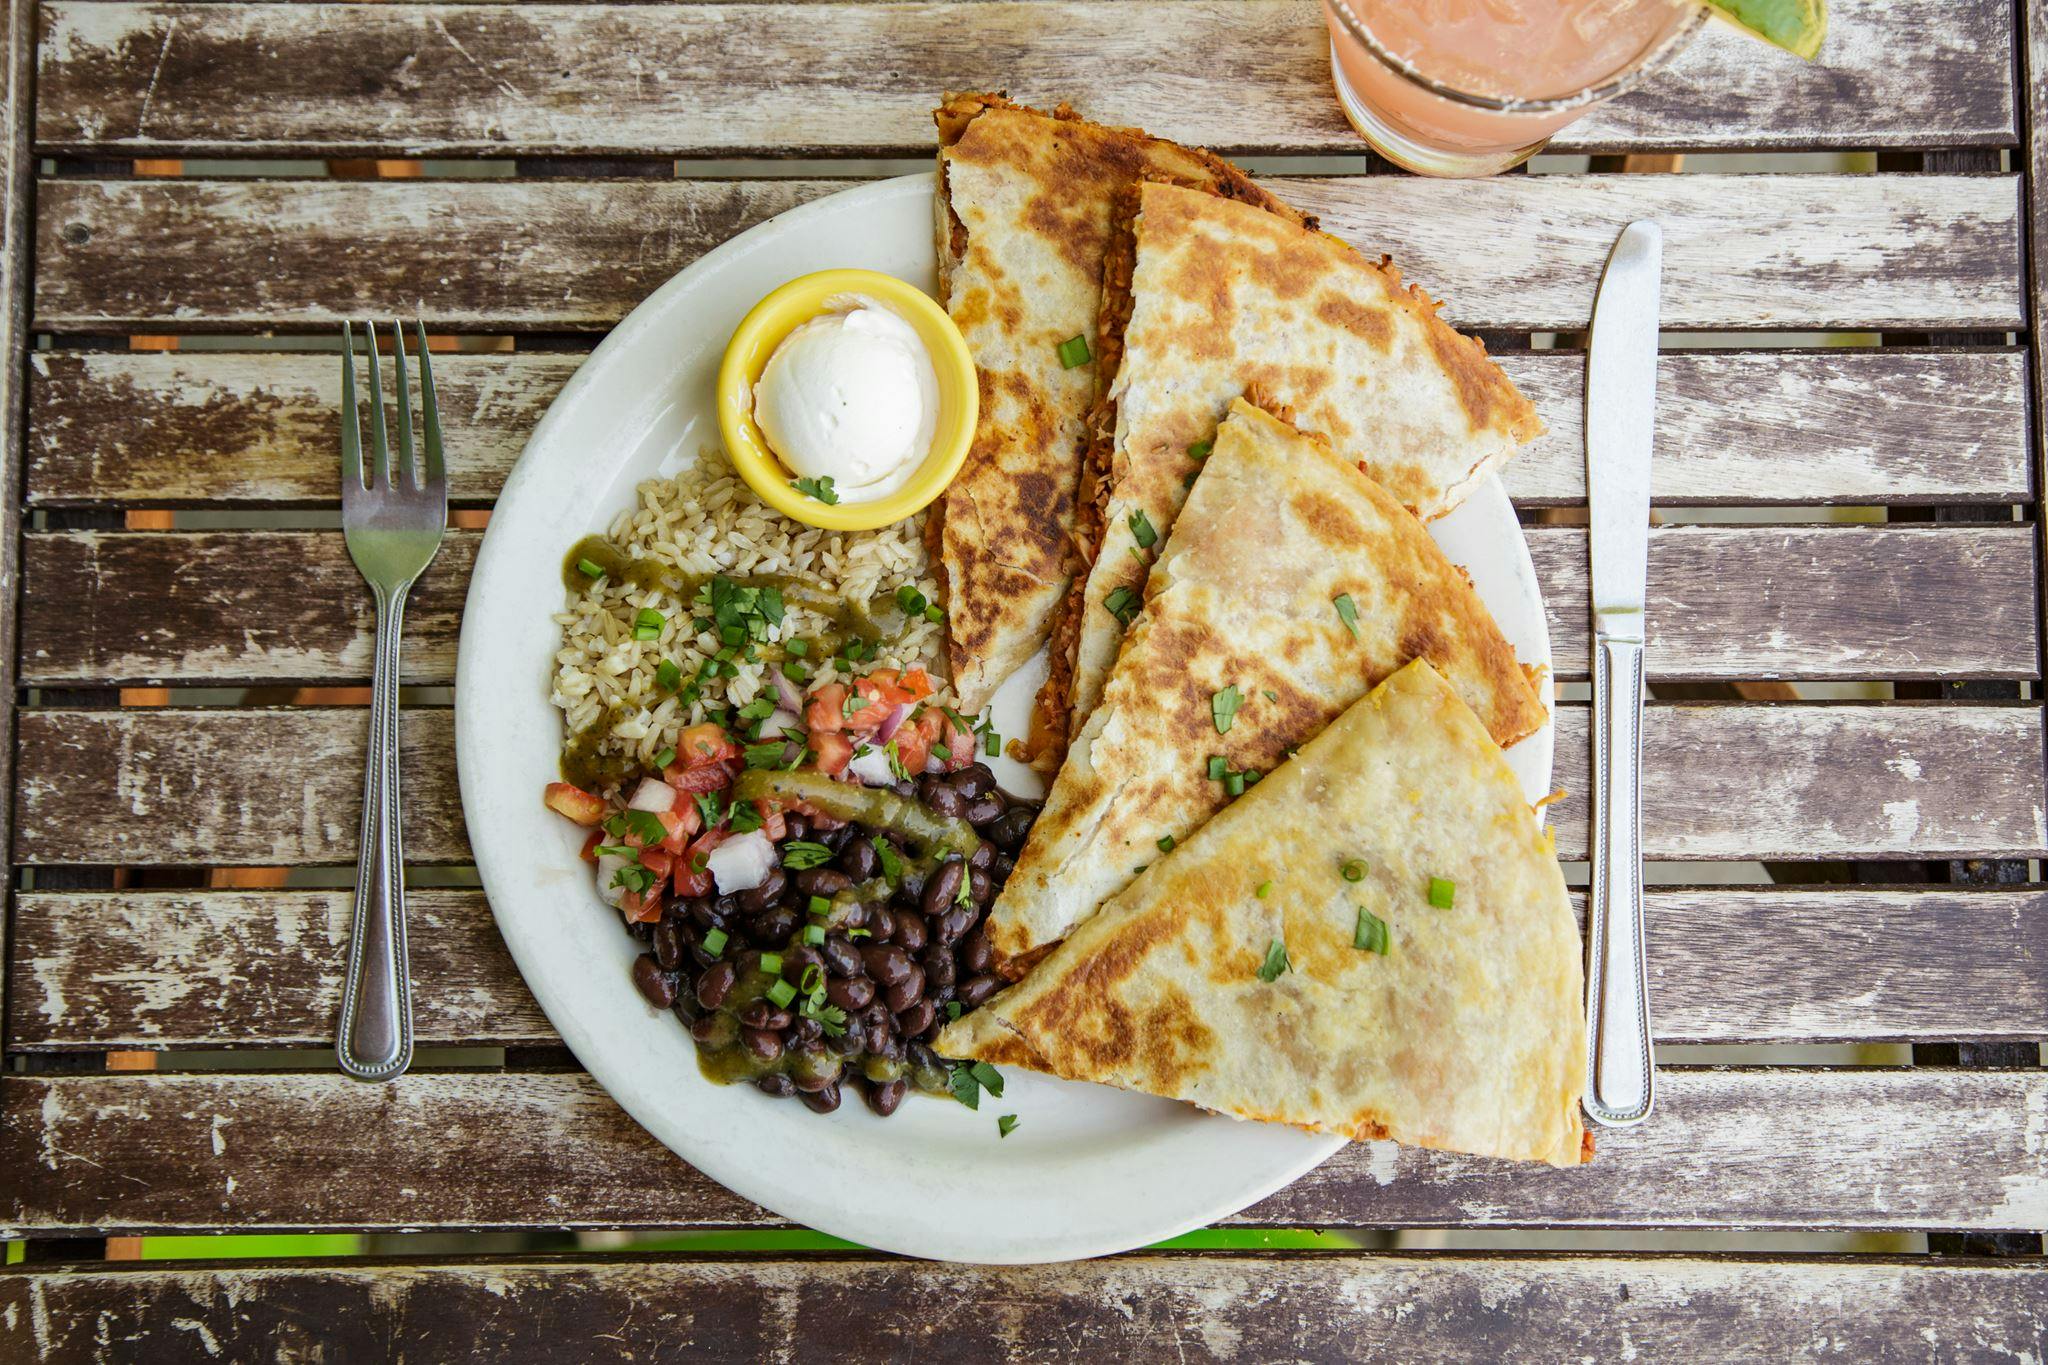 Jackfruit Quesadilla from The Green Owl in Madison, WI